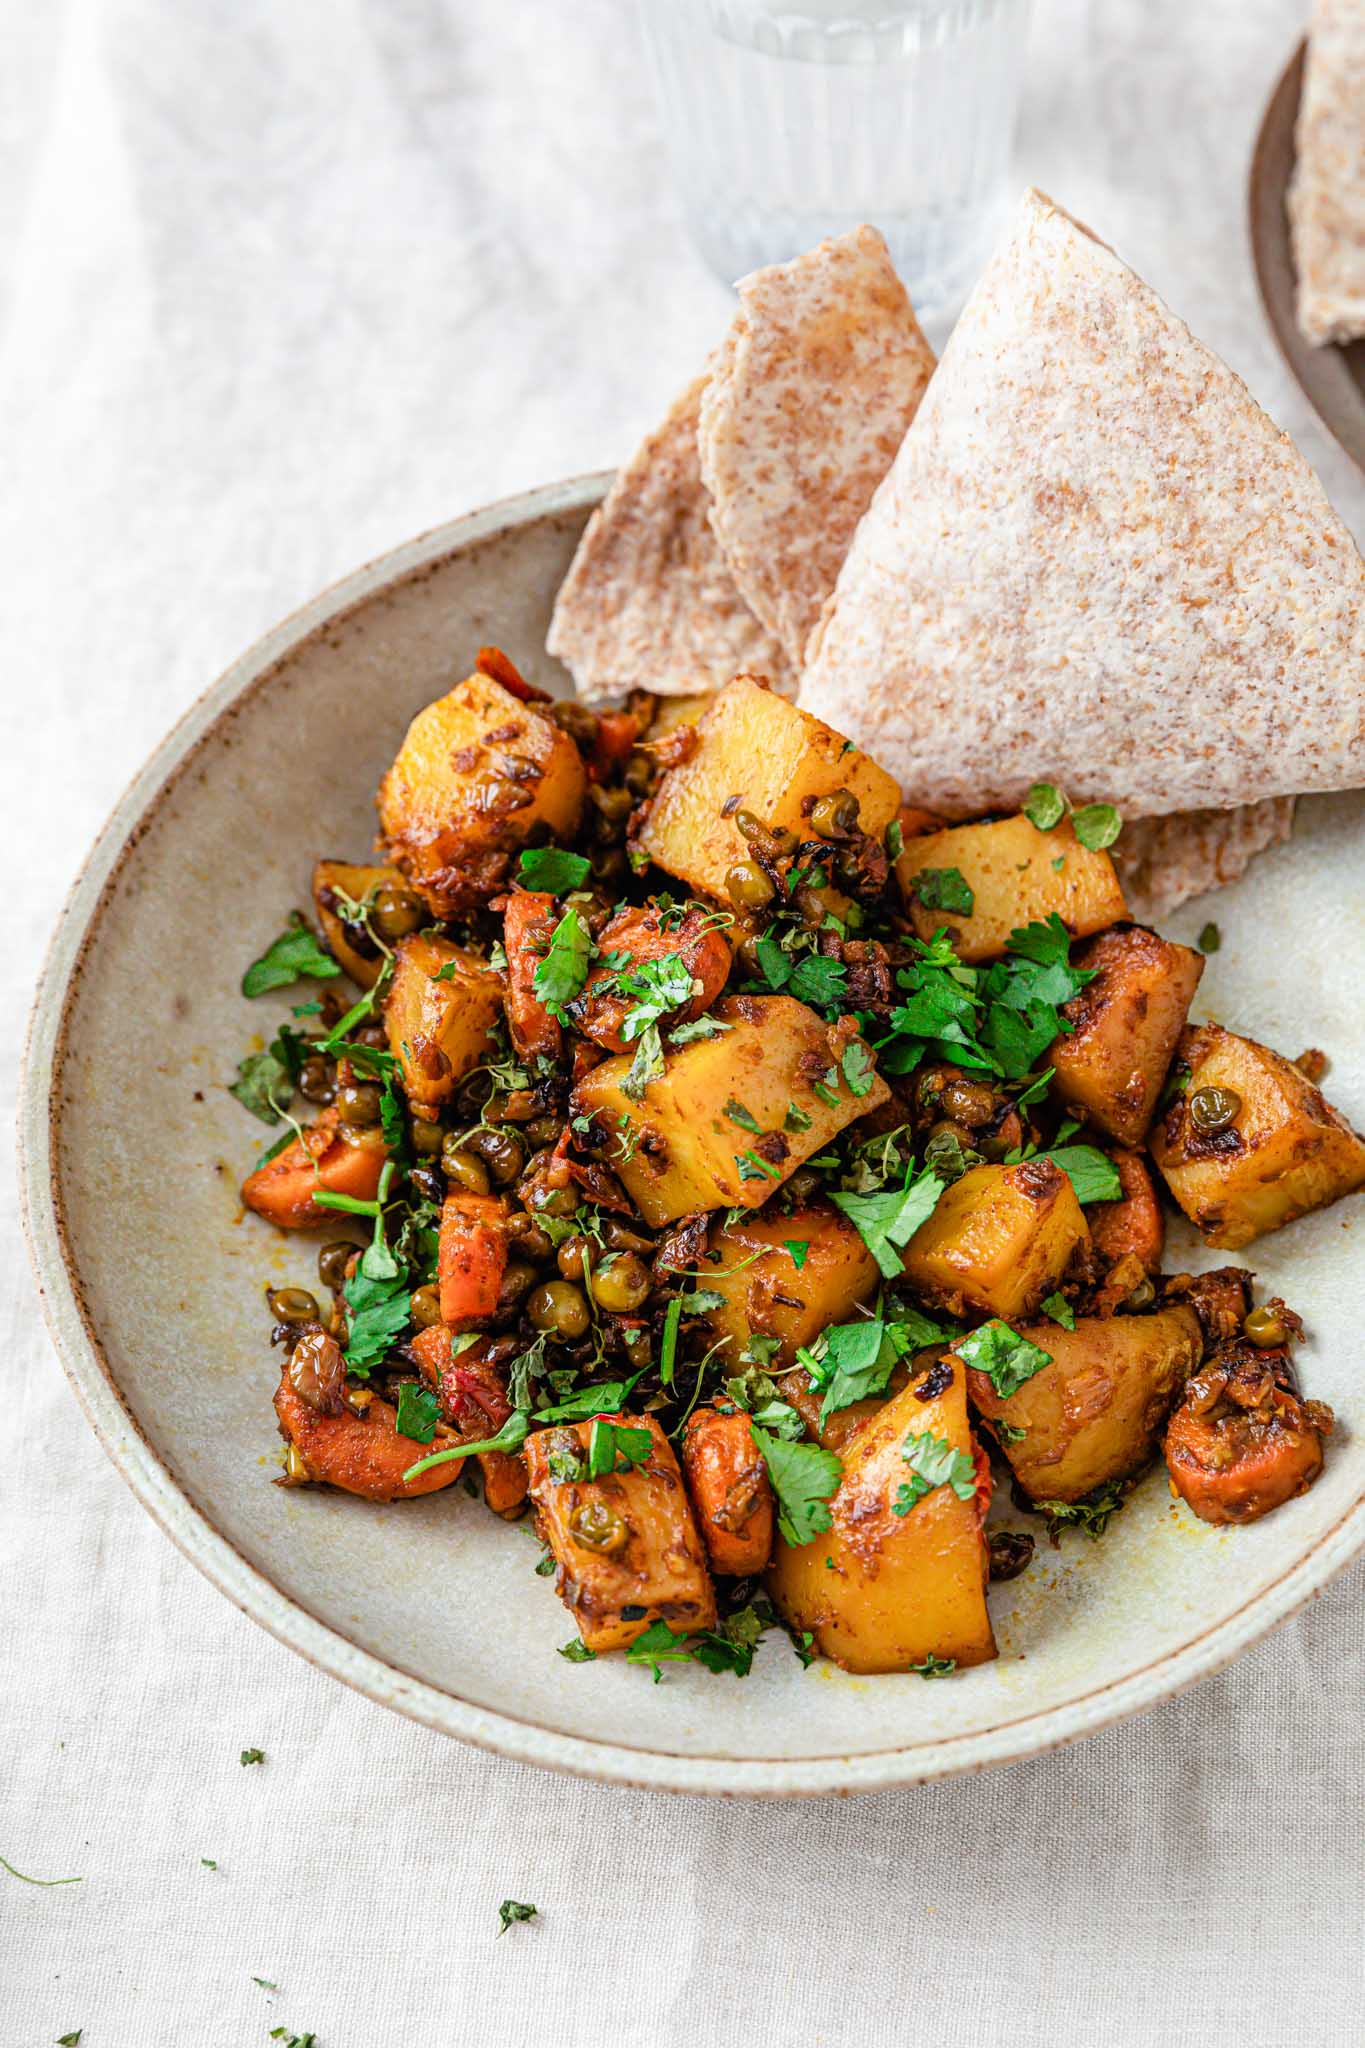 Potatoes, carrots, and in a beige bowl with a piece of roti on the side.